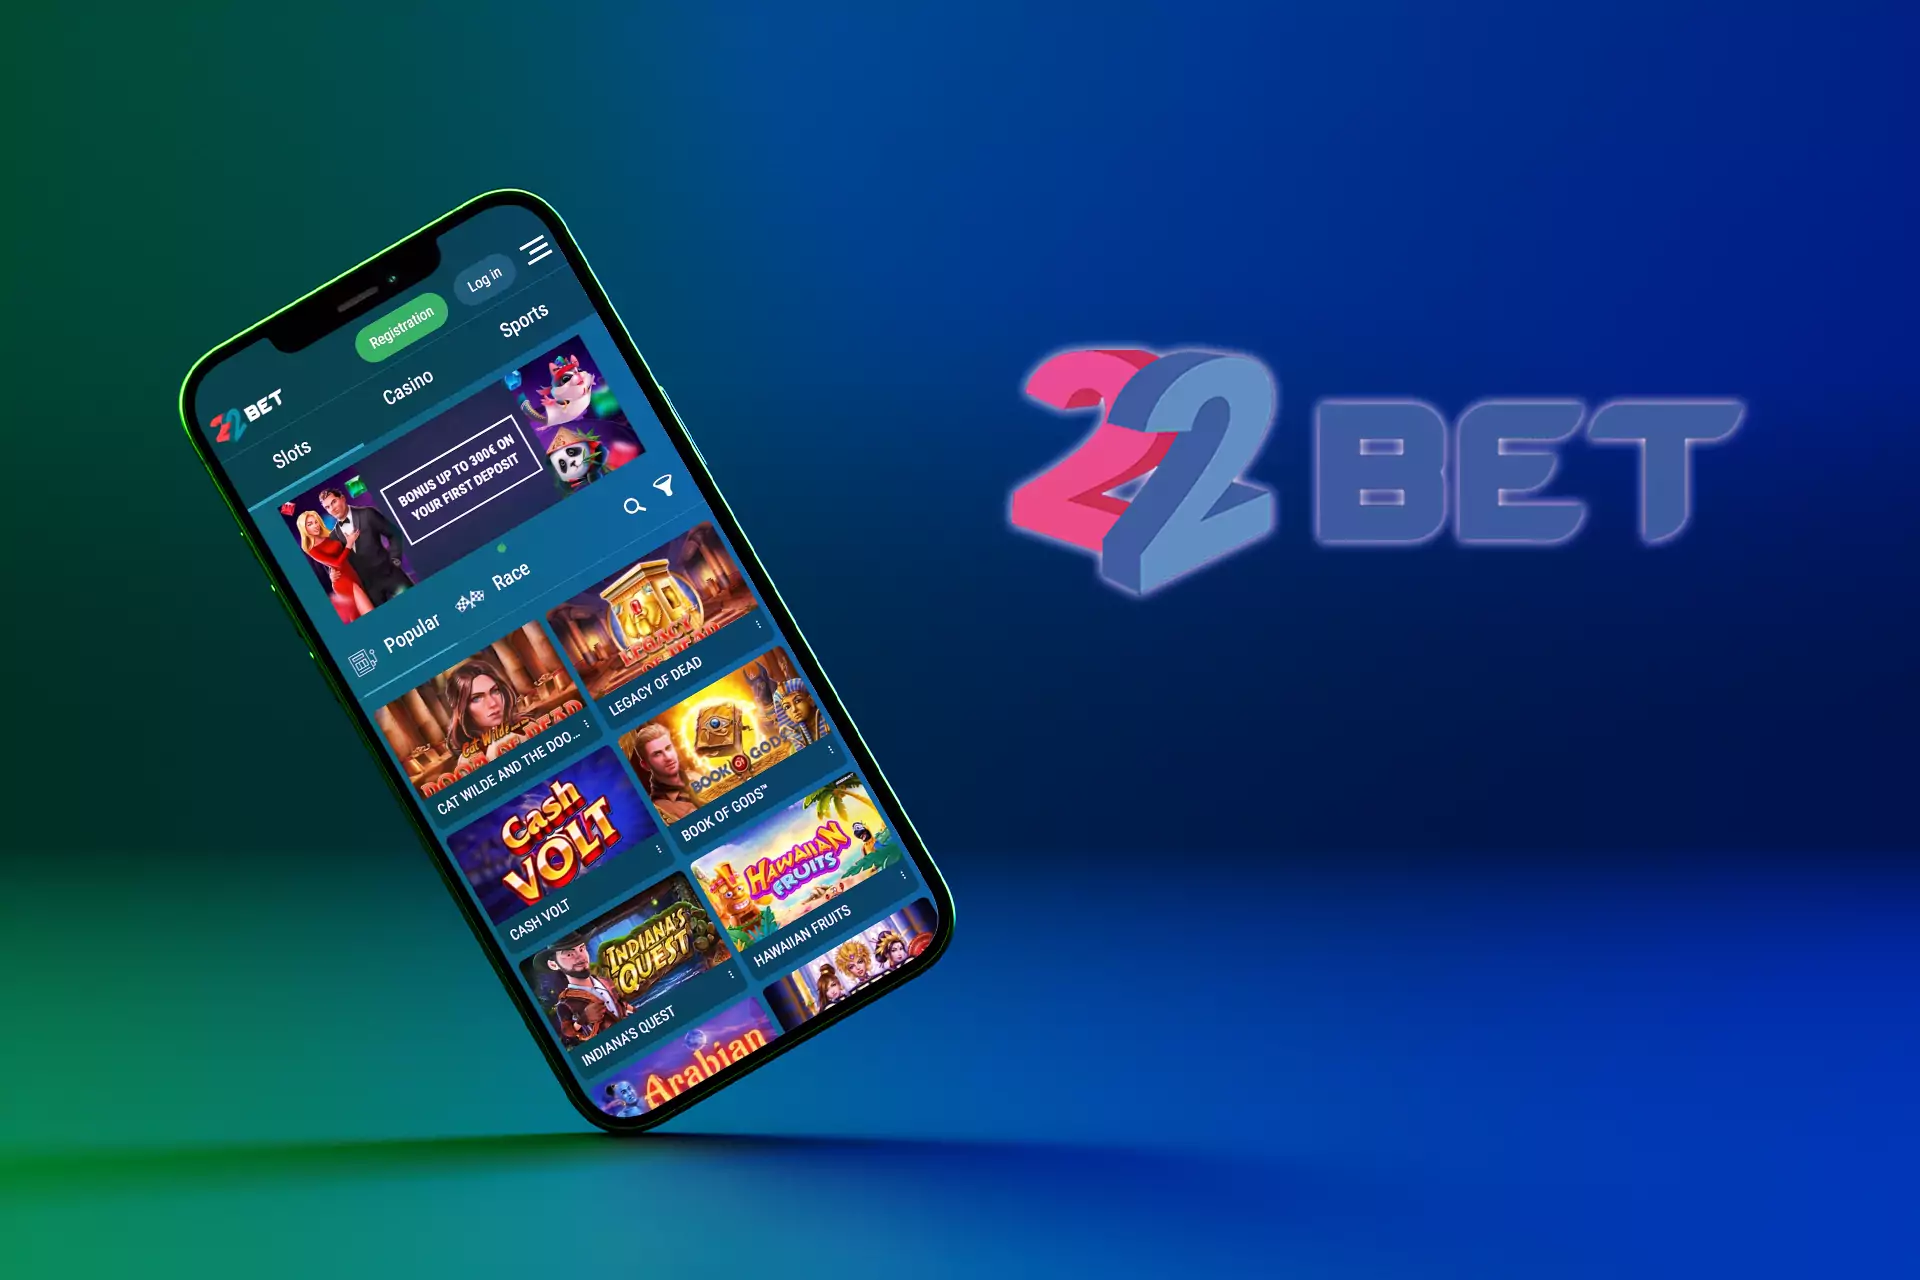 Like many others, the 22bet Casino works under the Curacao license.